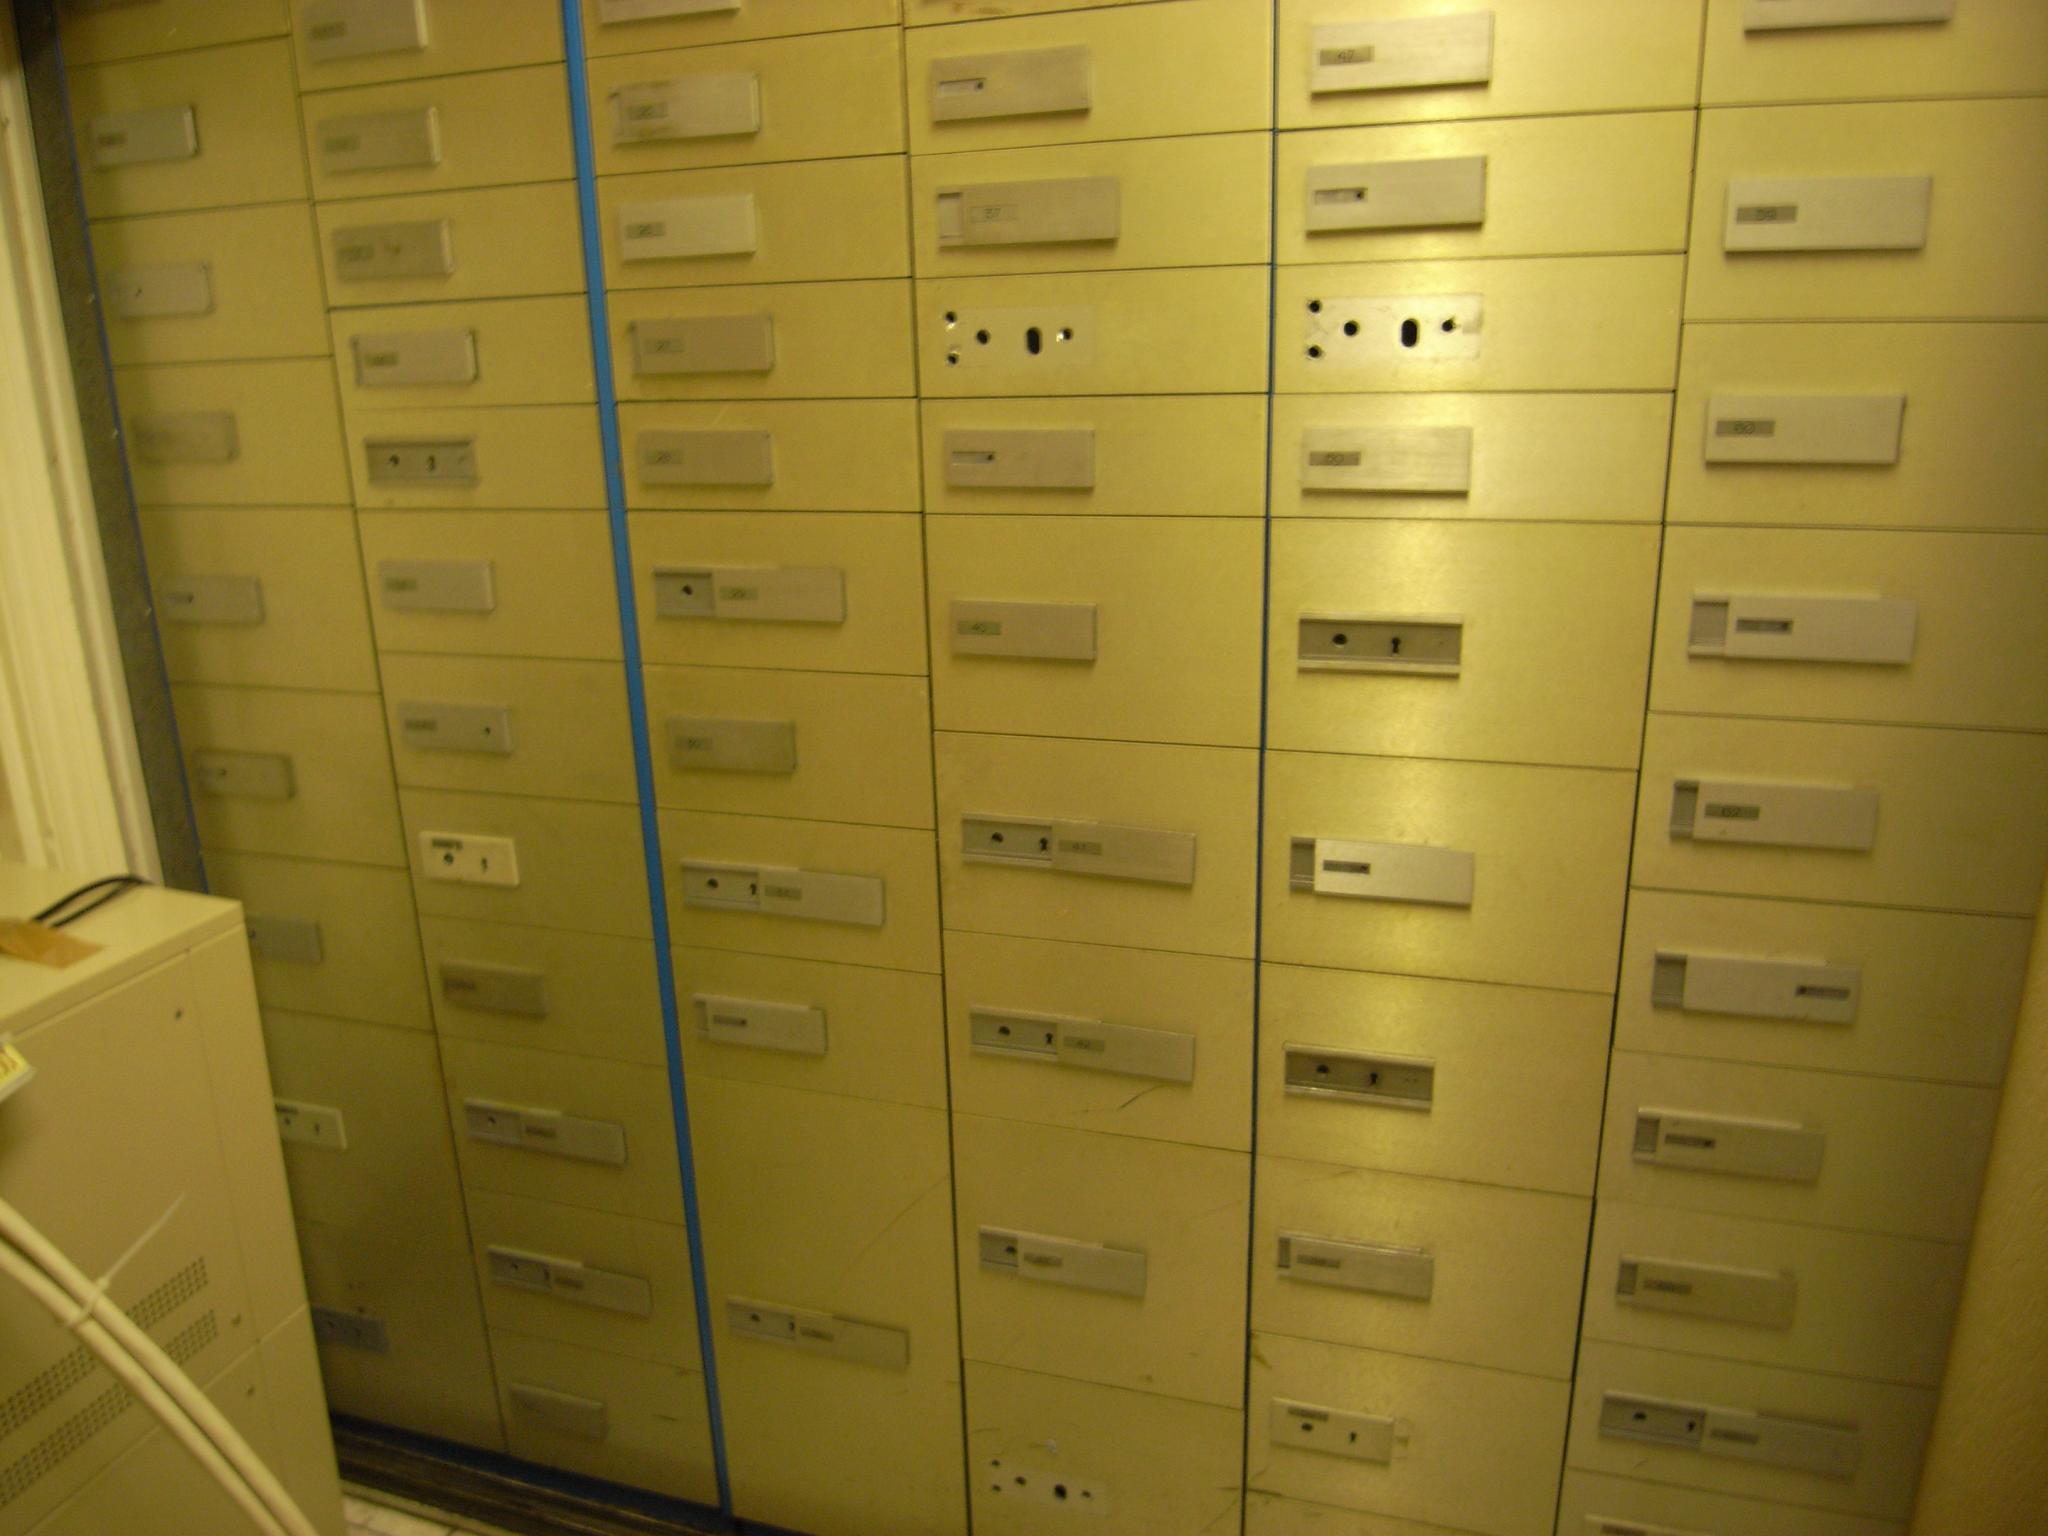 several rows of filing cabinets are stacked high